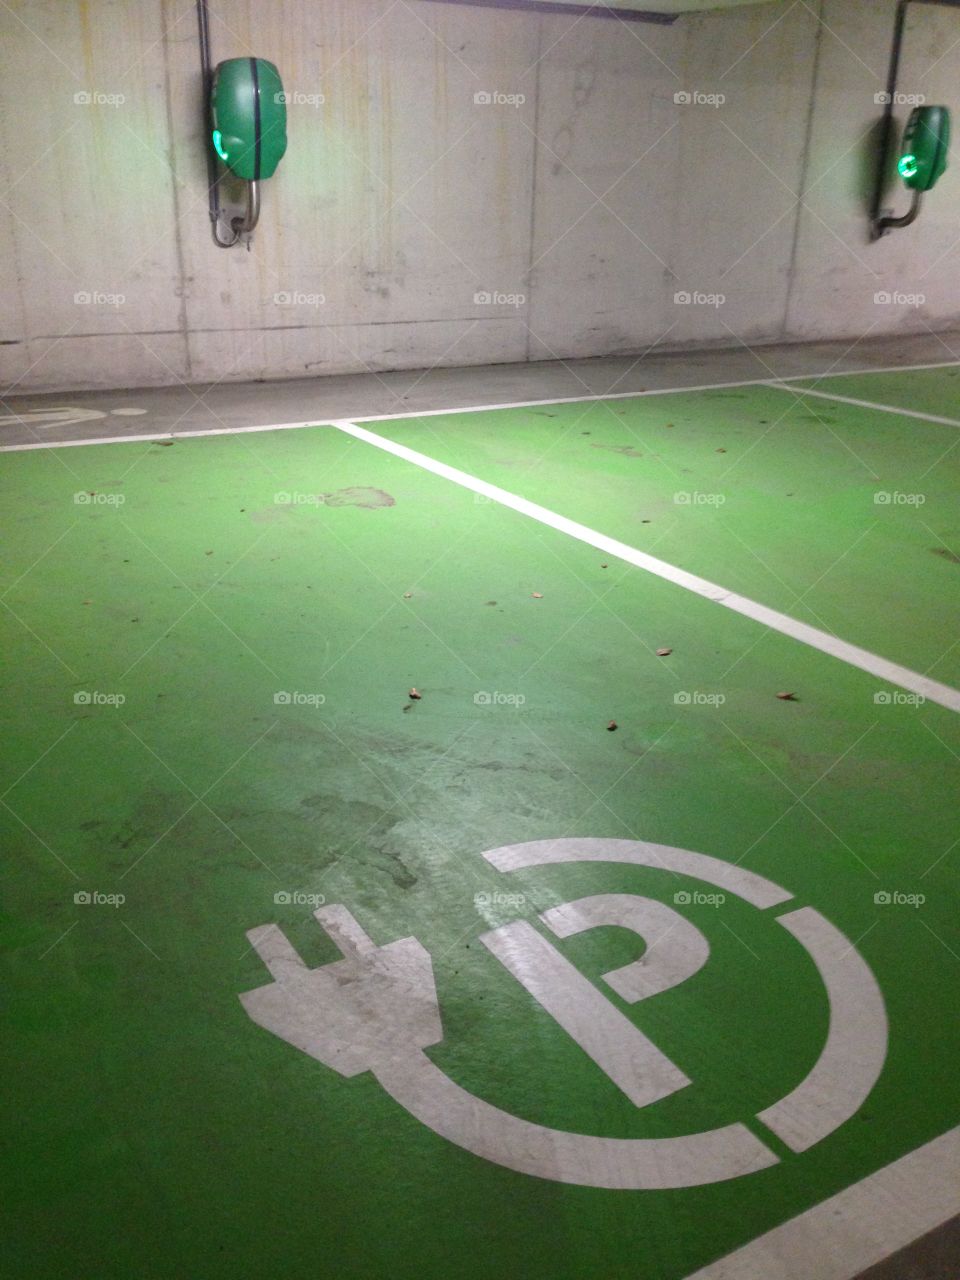 Parkings space reserved for electronic cars in a underground parking garage.